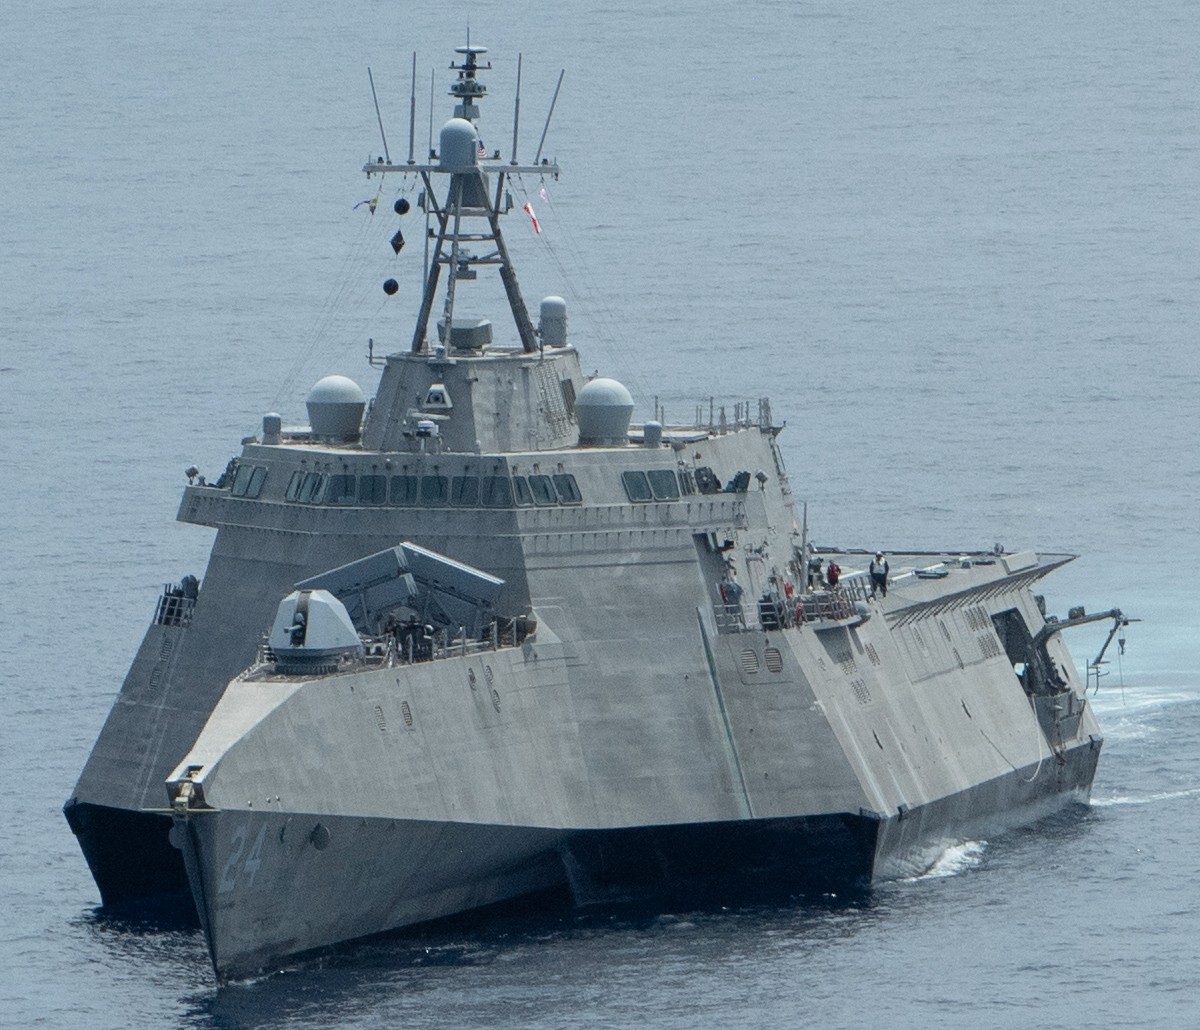 lcs-24 uss oakland independence class littoral combat ship us navy 15